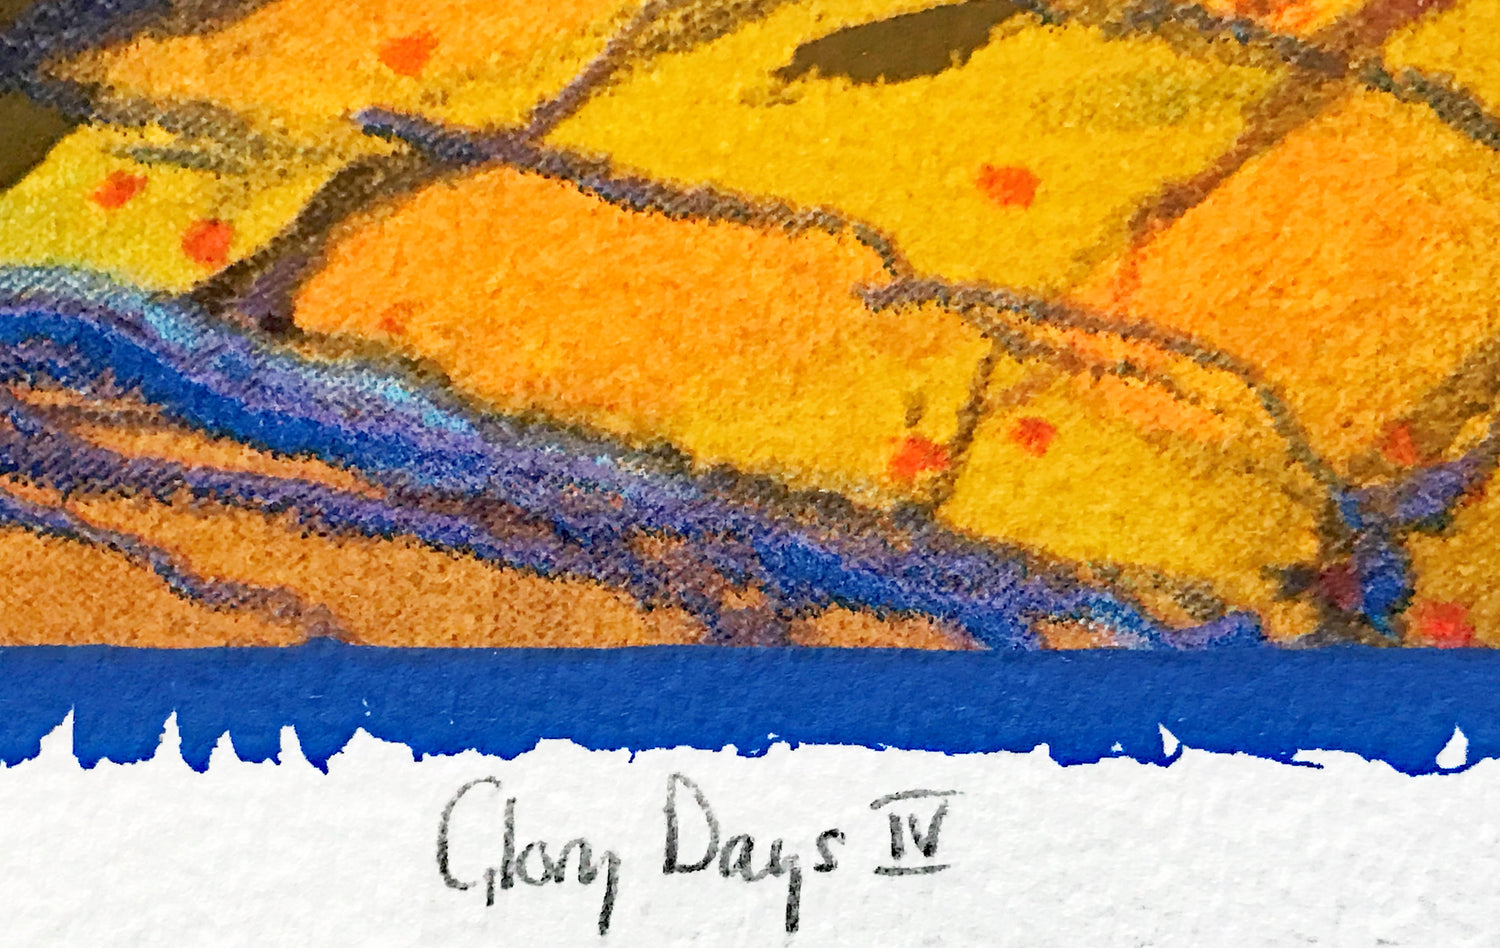 Glory Days IV B H Brody Serigraph Print Artist Hand Signed and Numbered